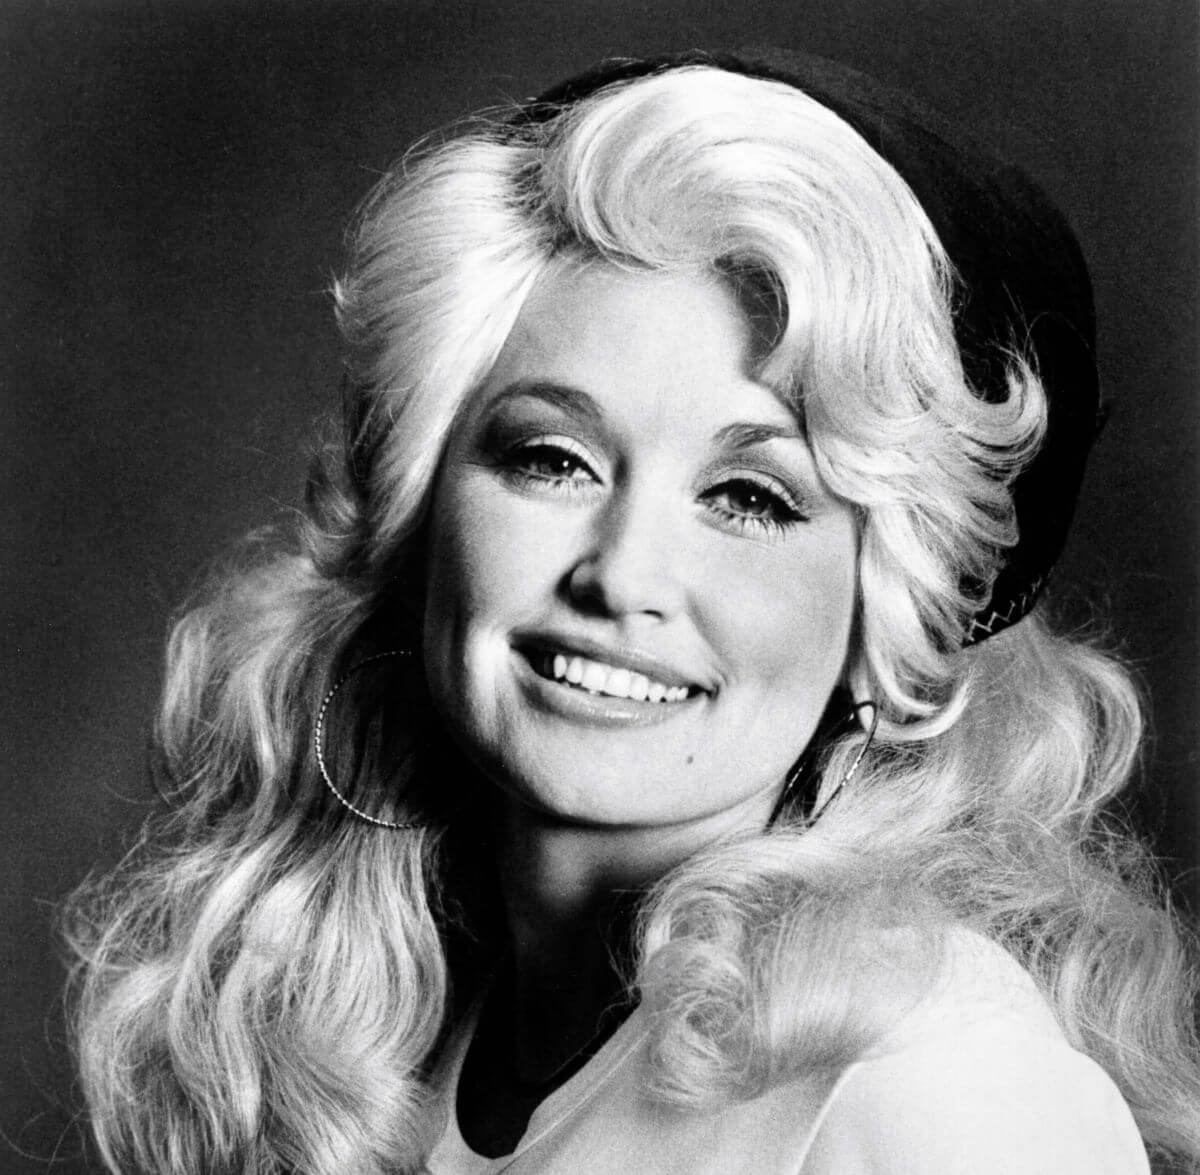 A black and white picture of Dolly Parton wearing hoop earrings.